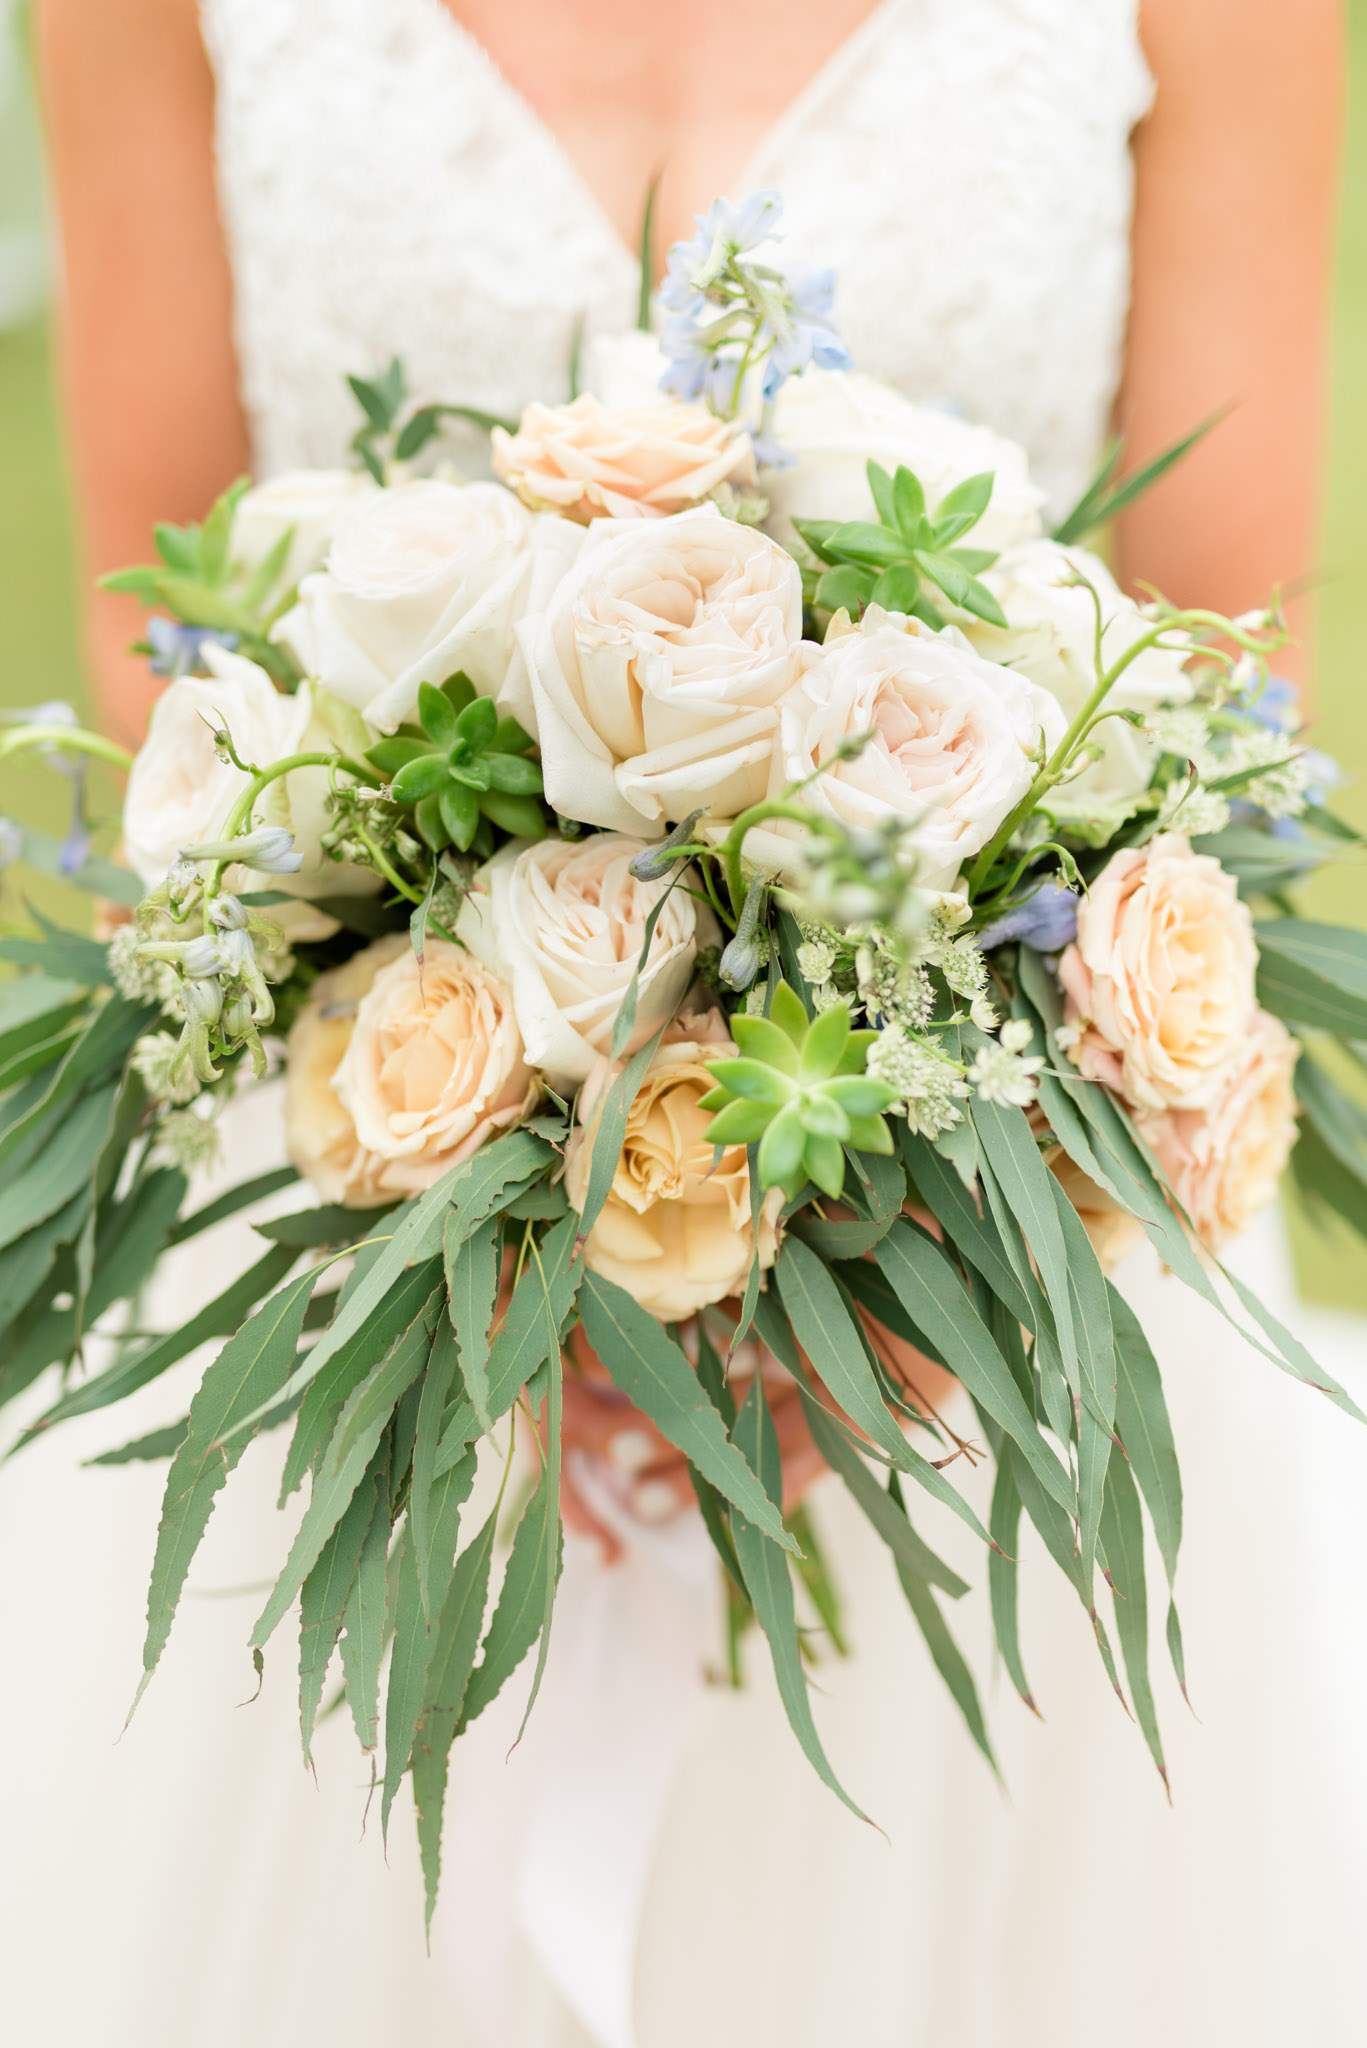 White and pink wedding flowers.